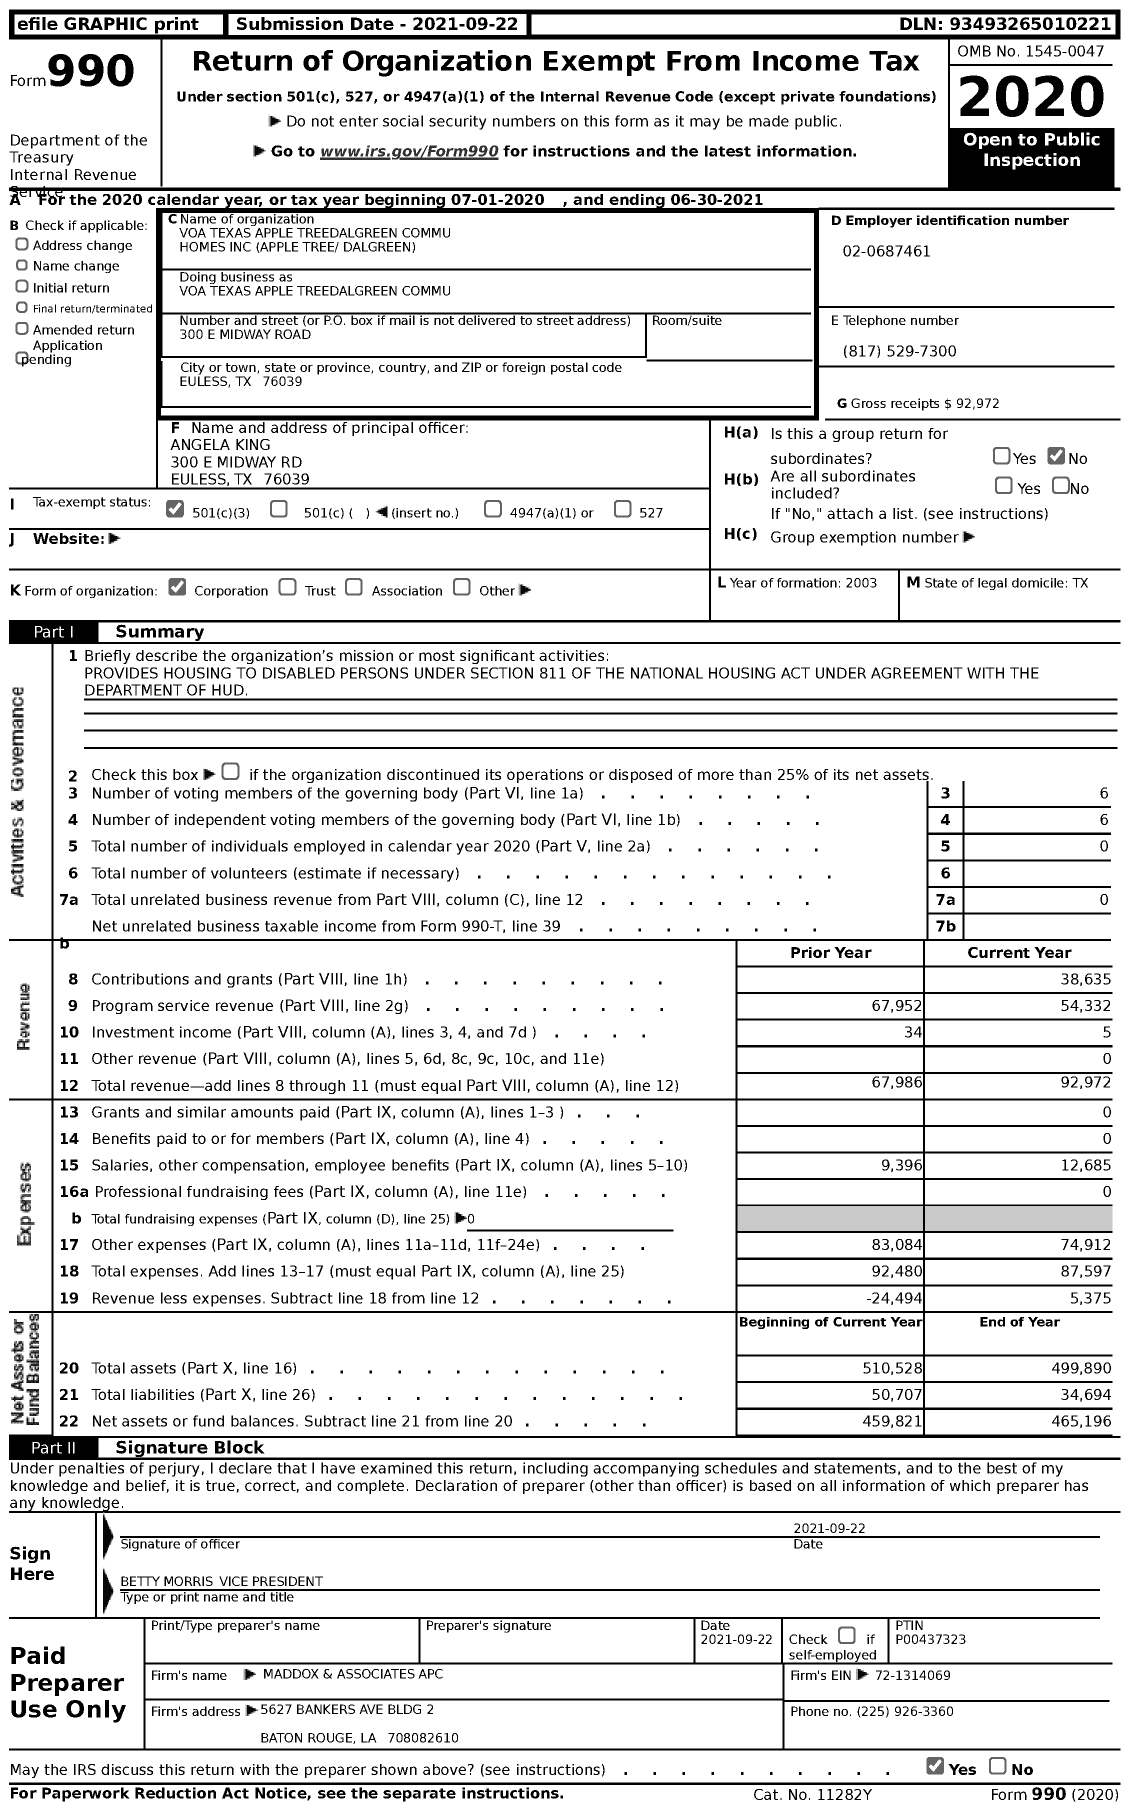 Image of first page of 2020 Form 990 for Volunteers of America - VOA Texas Apple Treedalgreen Commu